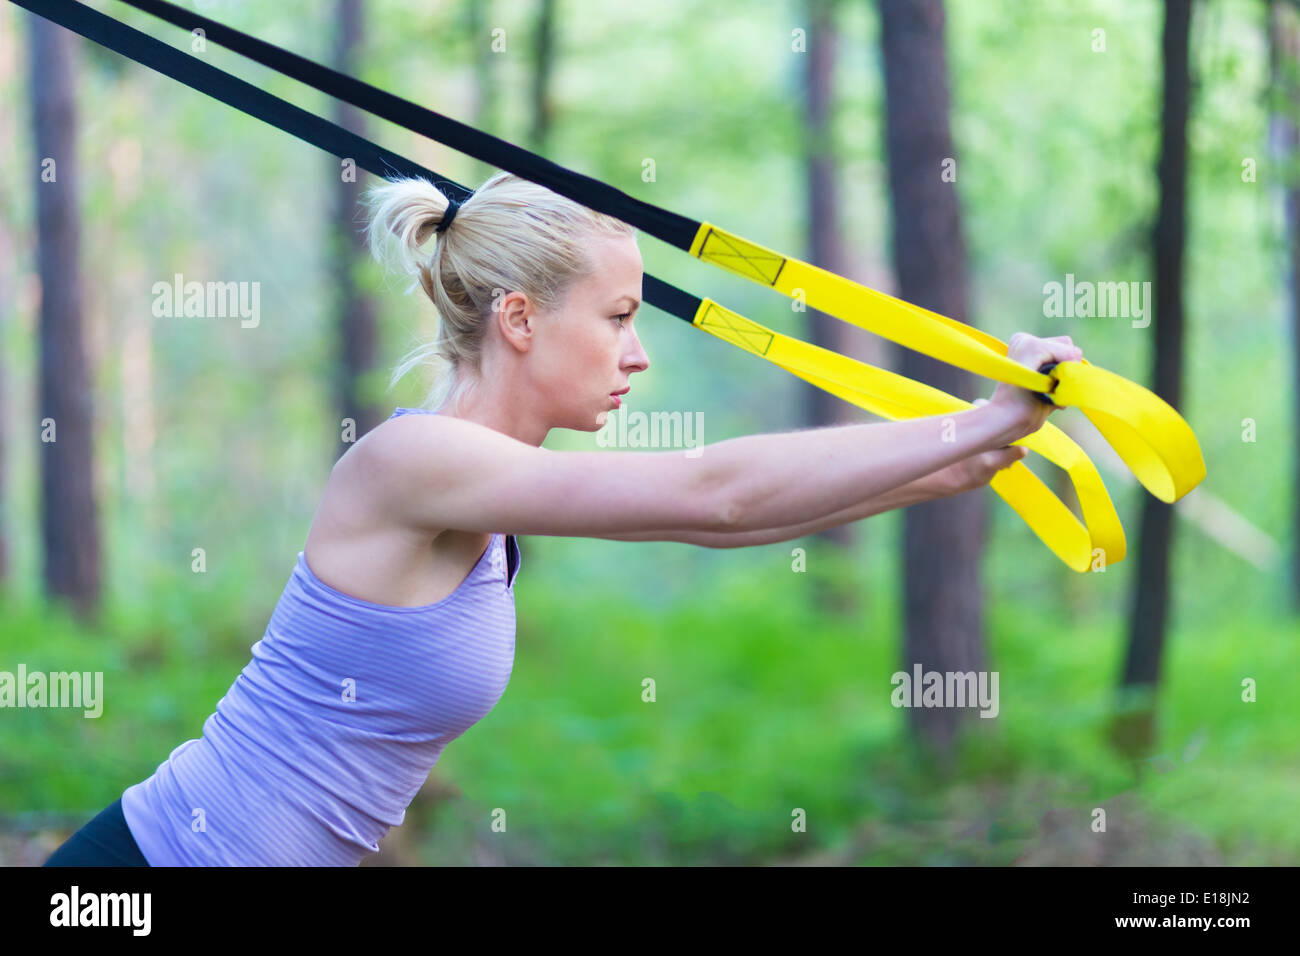 Training with fitness straps outdoors. Stock Photo